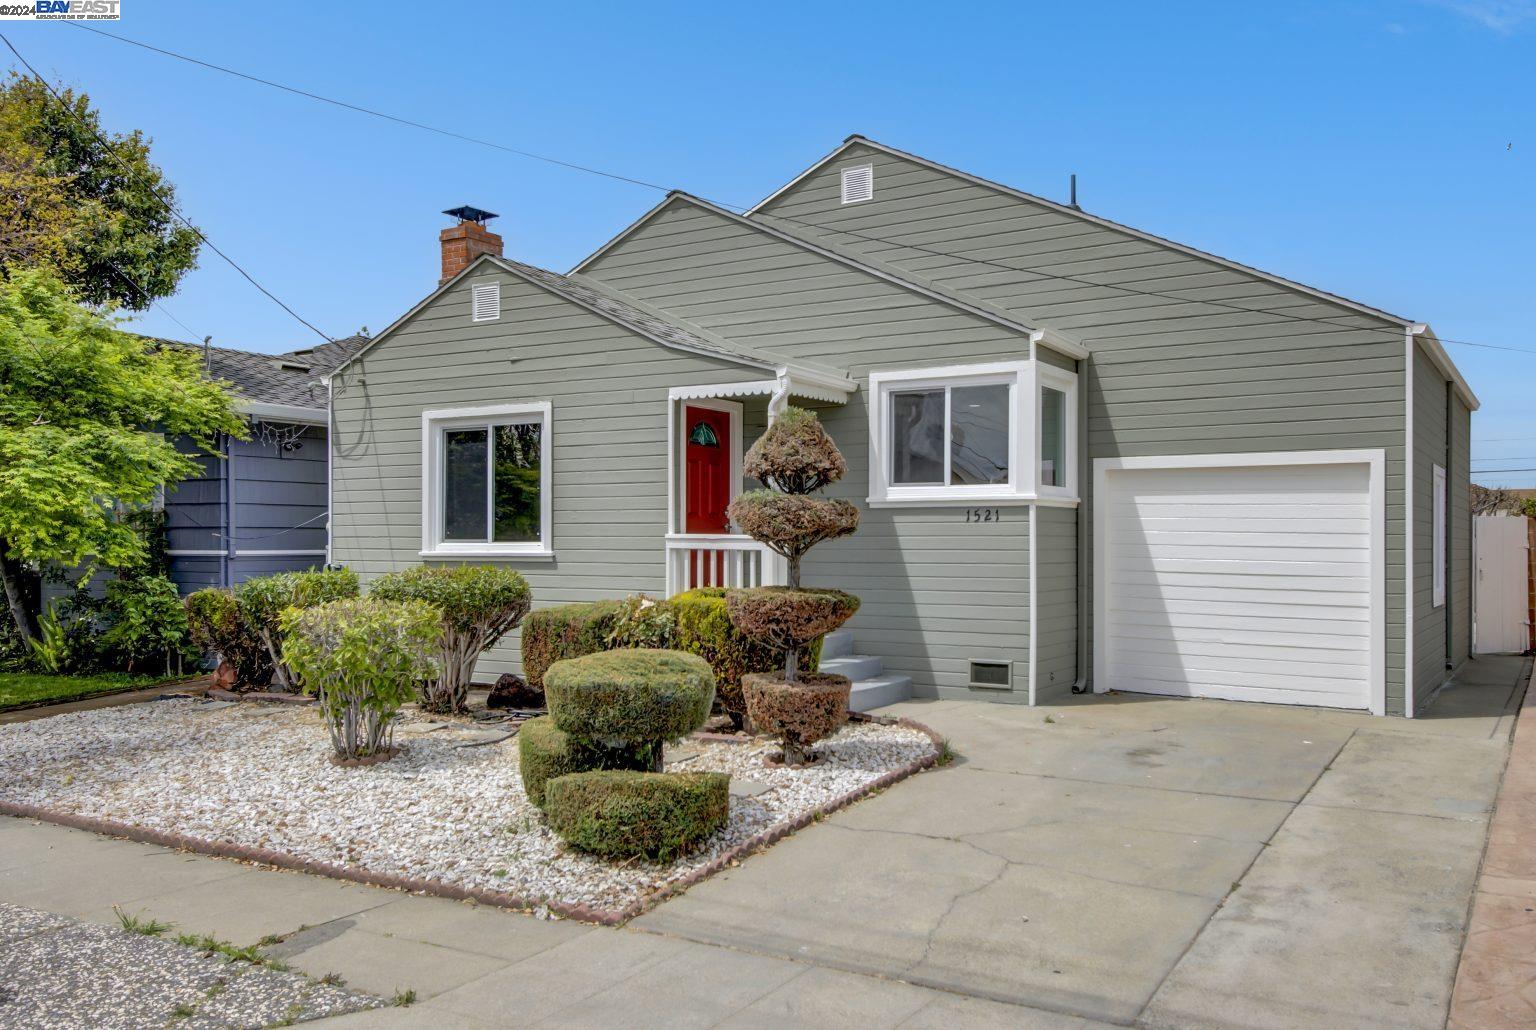 San Leandro single story home has been tastefully renovated. Features include an open floor plan with lots of natural light. Home features updated kitchen with quartz counter tops, new appliances, recessed lights, new LVP flooring throughout the home. Good size backyard perfect for entertaining and relaxing. Prime commuter location close to BART, Hwy 880 & 580. MUST SEE!